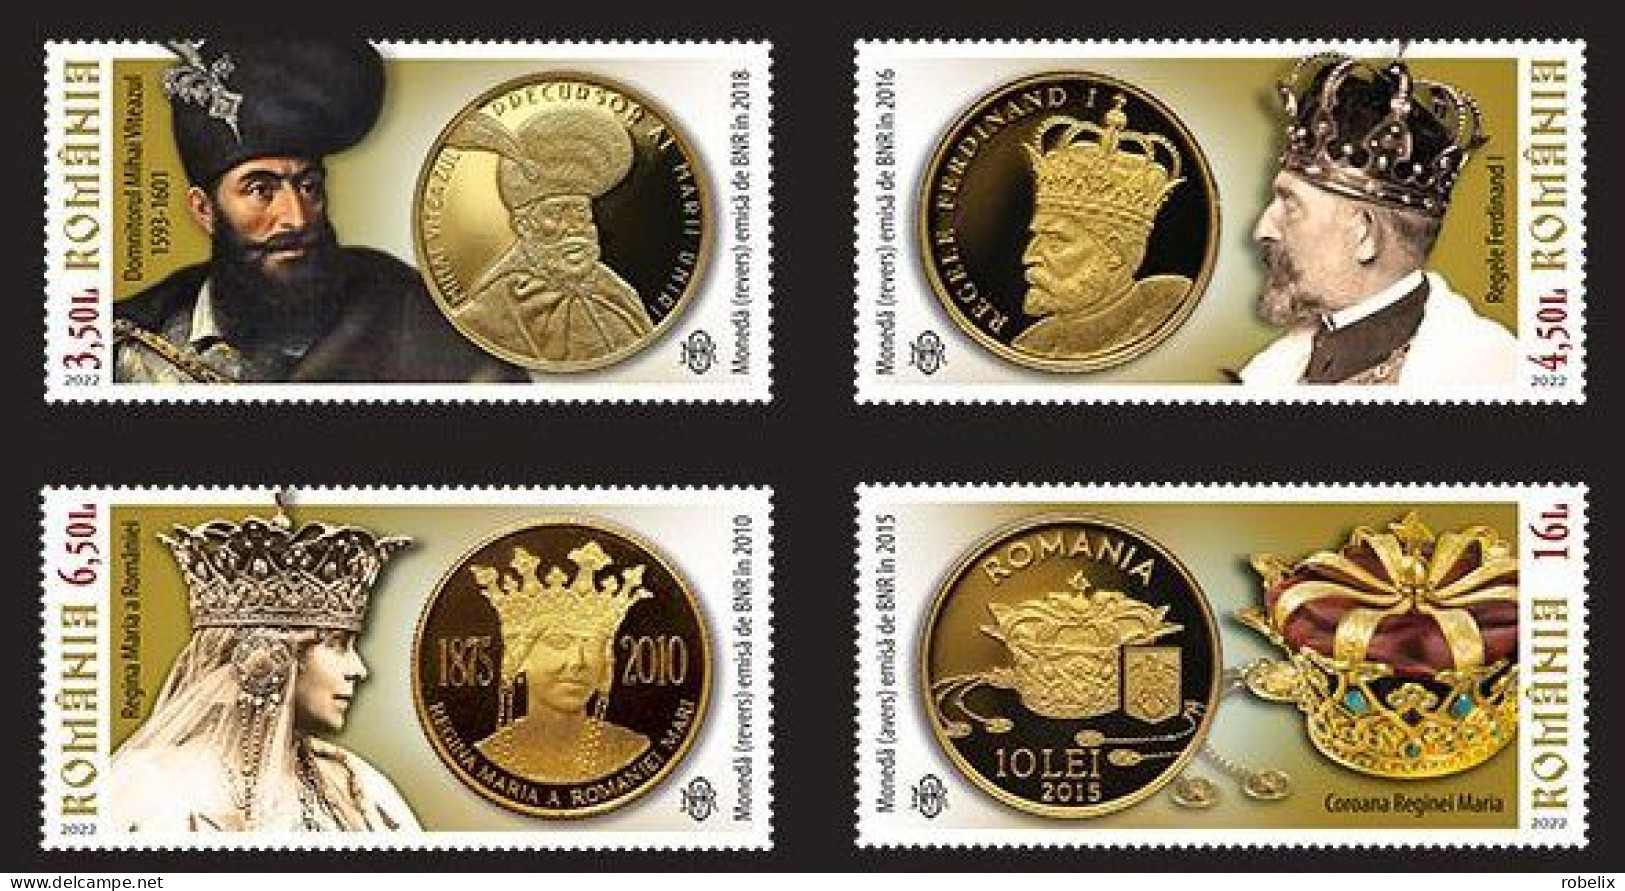 ROMANIA 2022  THE GREAT UNION IN NUMISMATICS - Gold Coins, Kings  - Set Of 4 Stamps   MNH** - Monedas